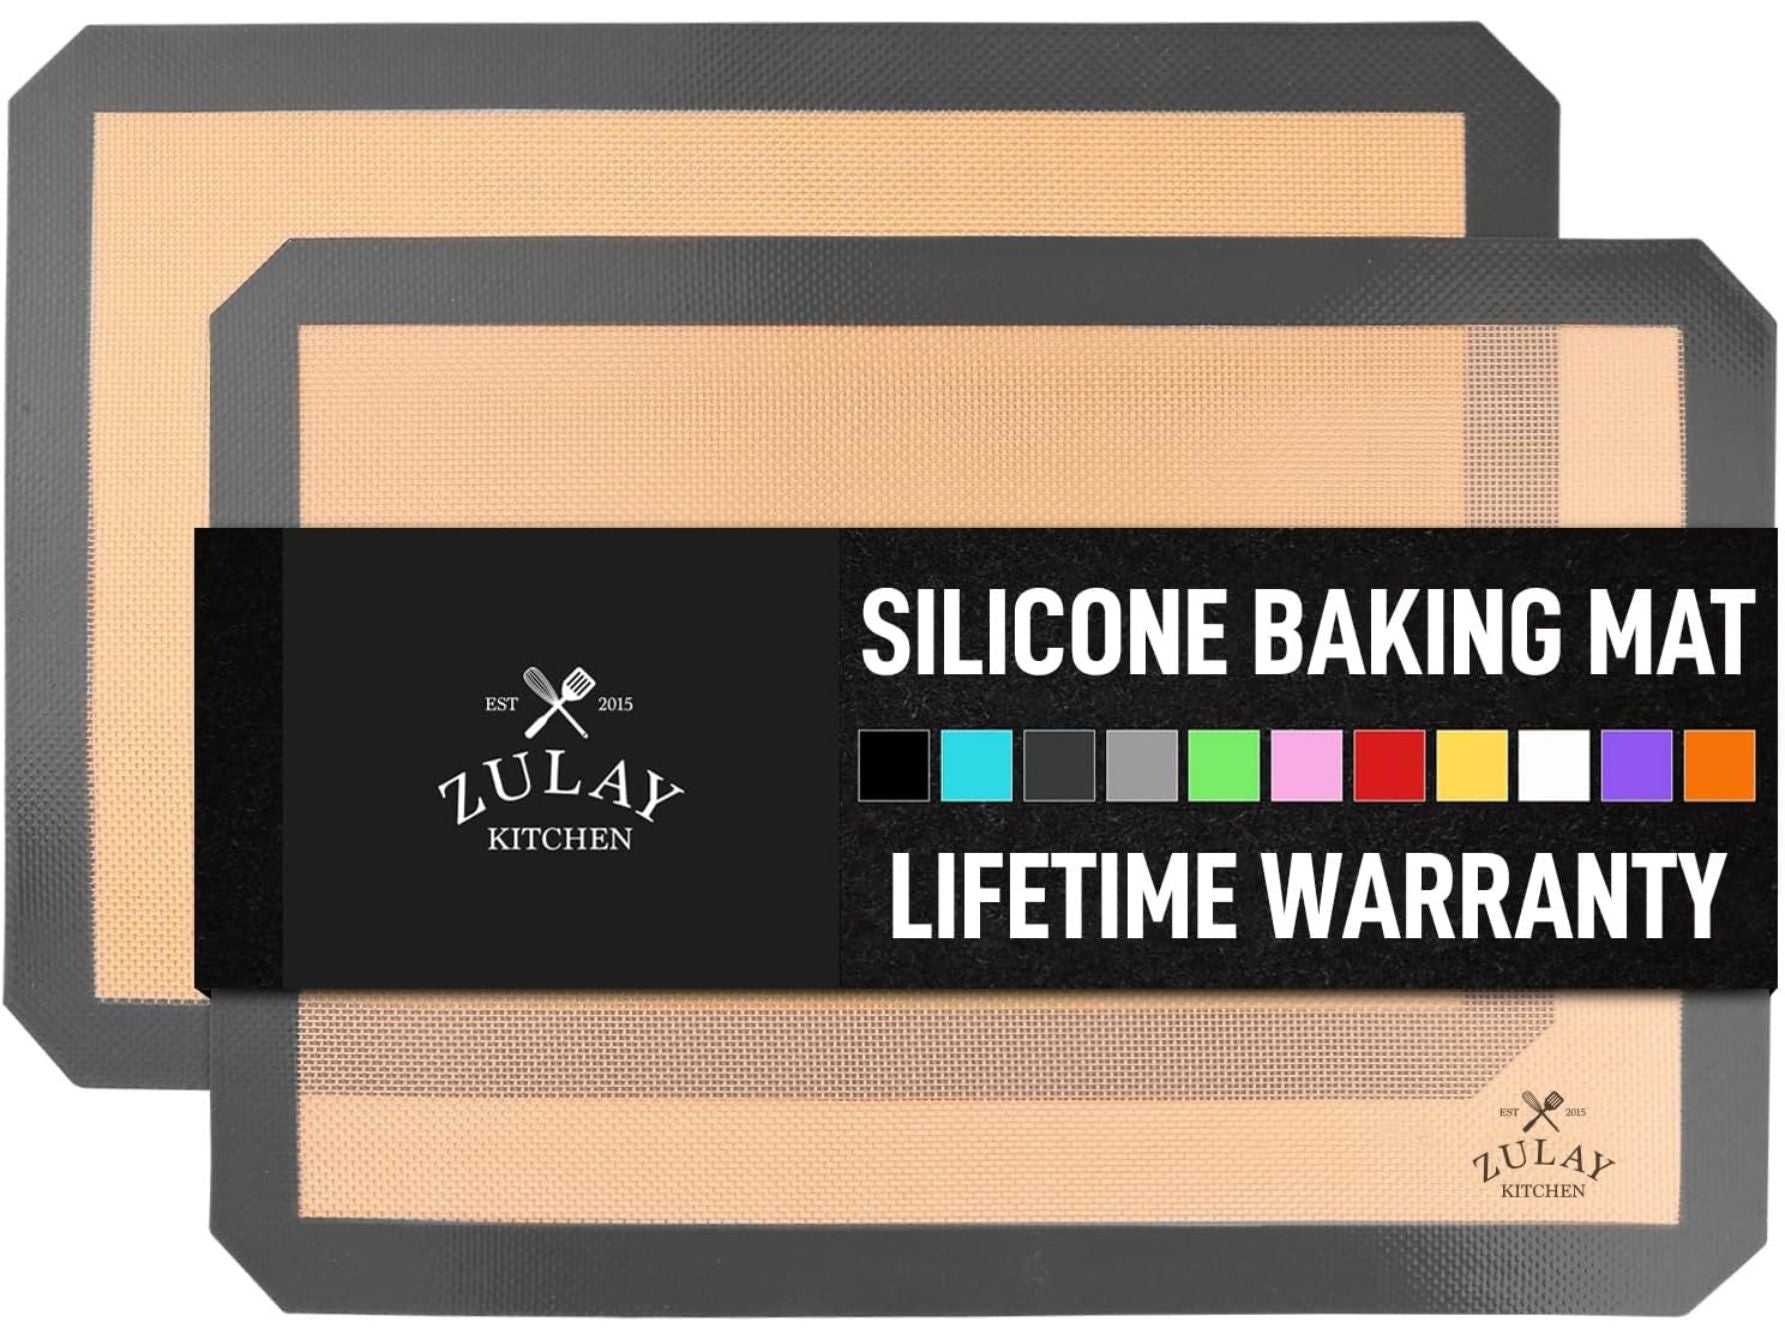 Full Size Baking Sheet Pan Aluminum with Plastic Cover – Kitchen Building  Equipment